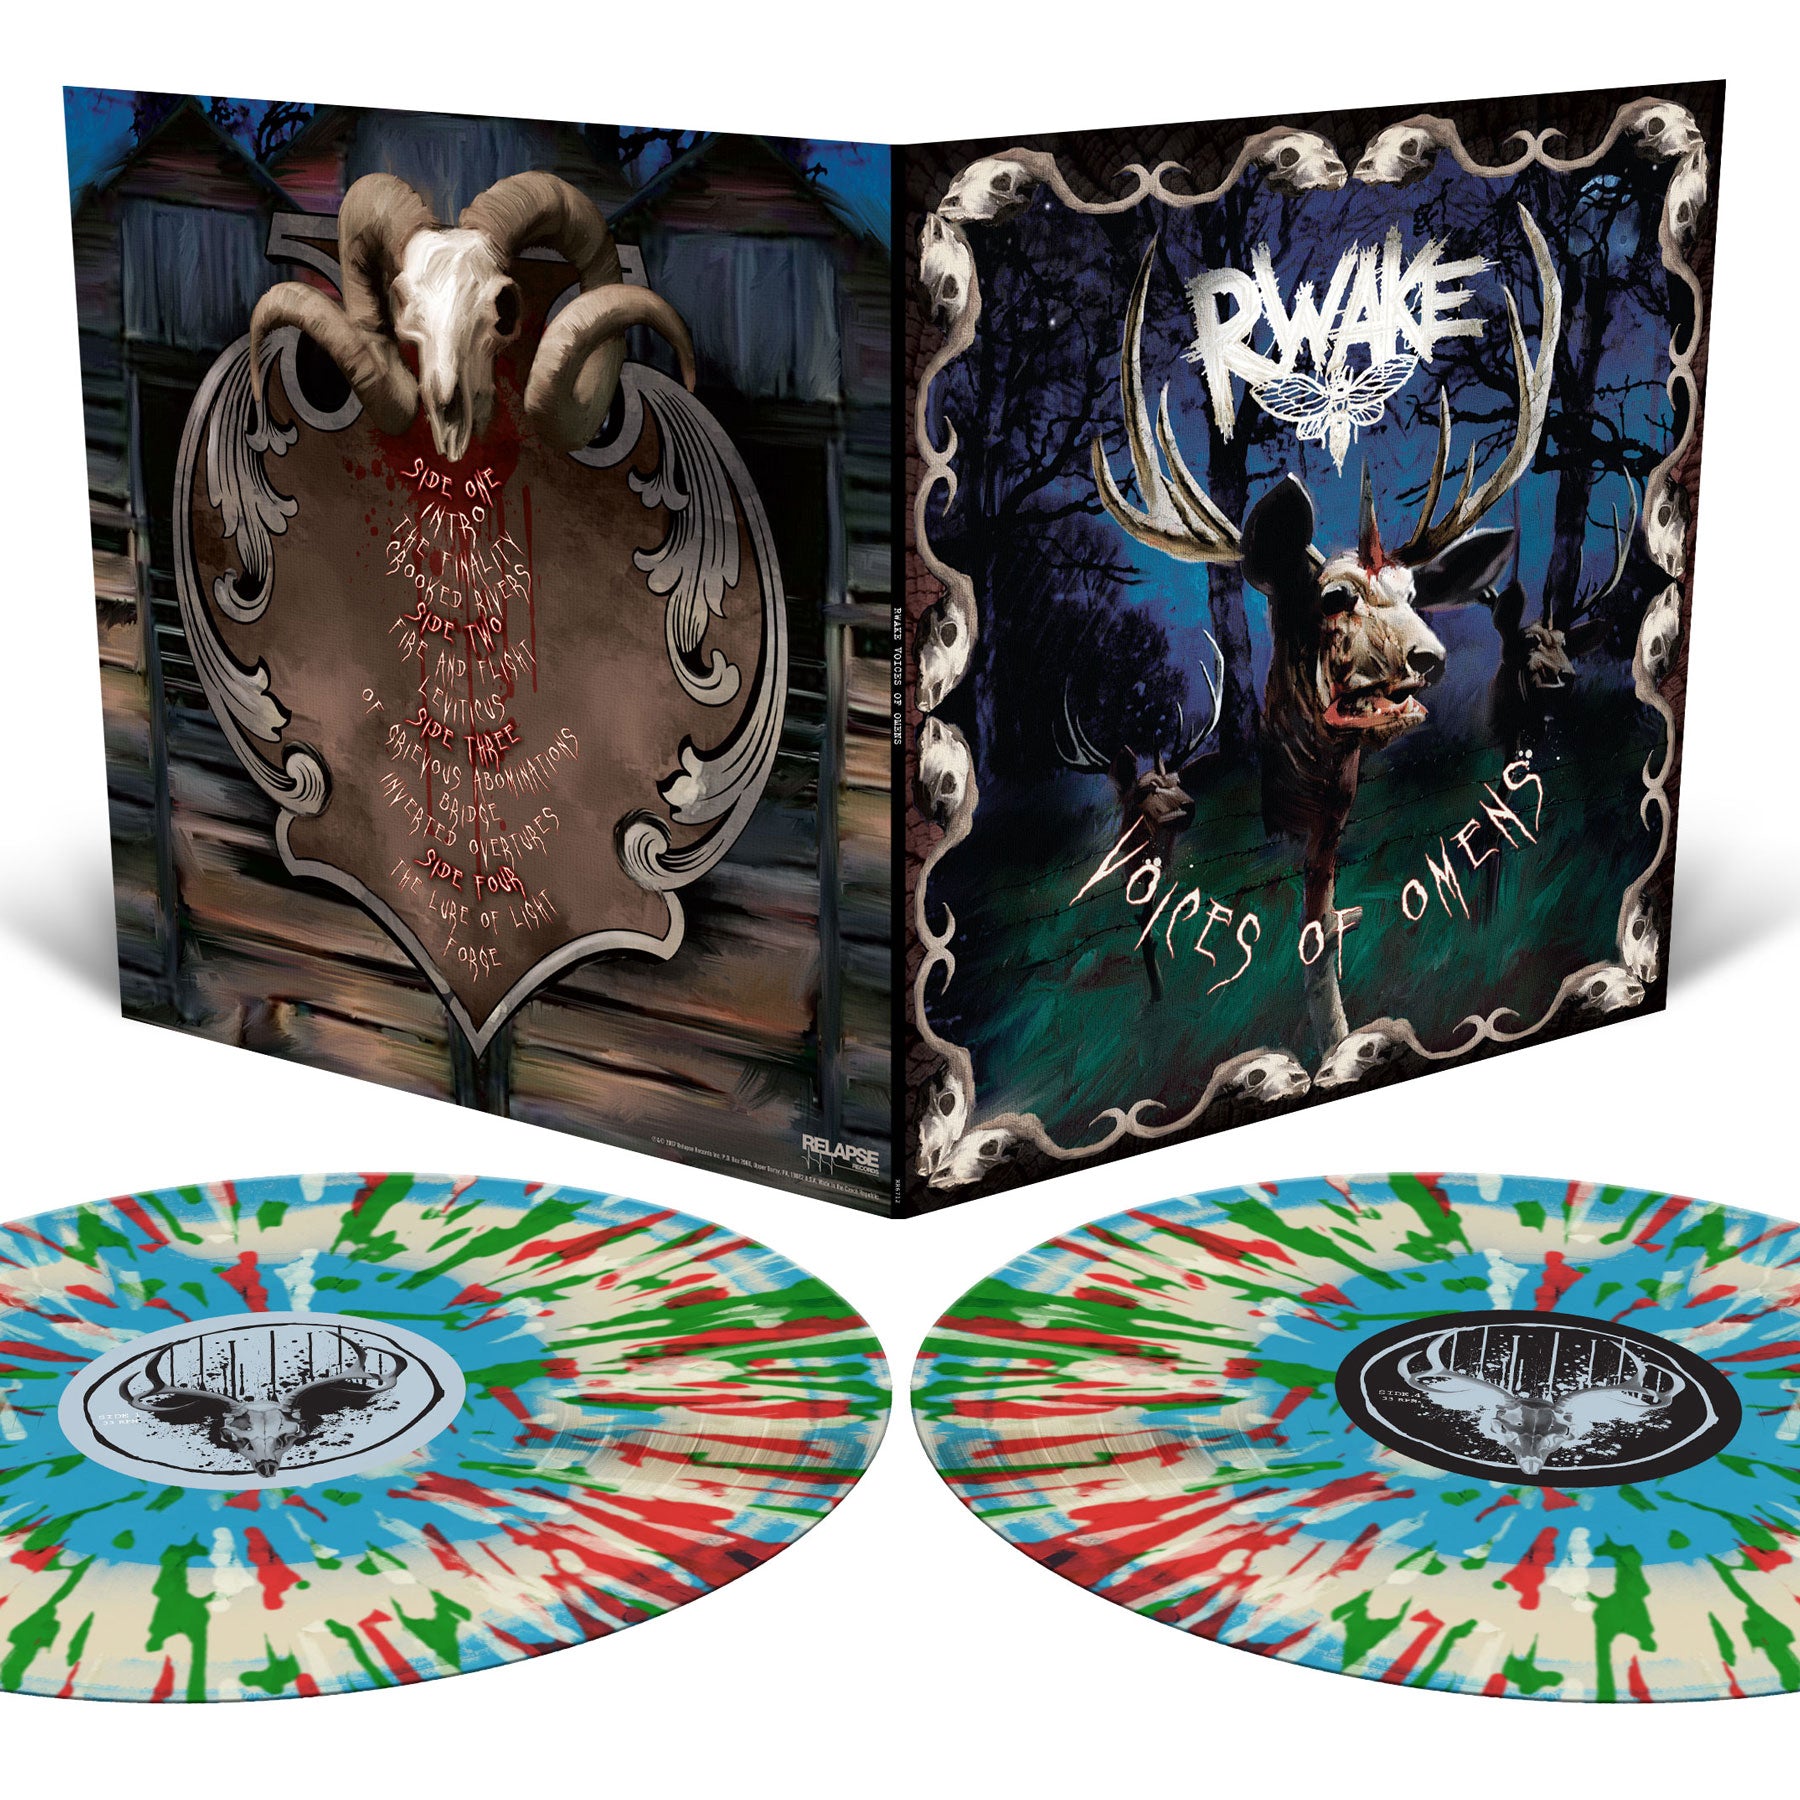 Rwake "Voices Of Omens" 2x12"